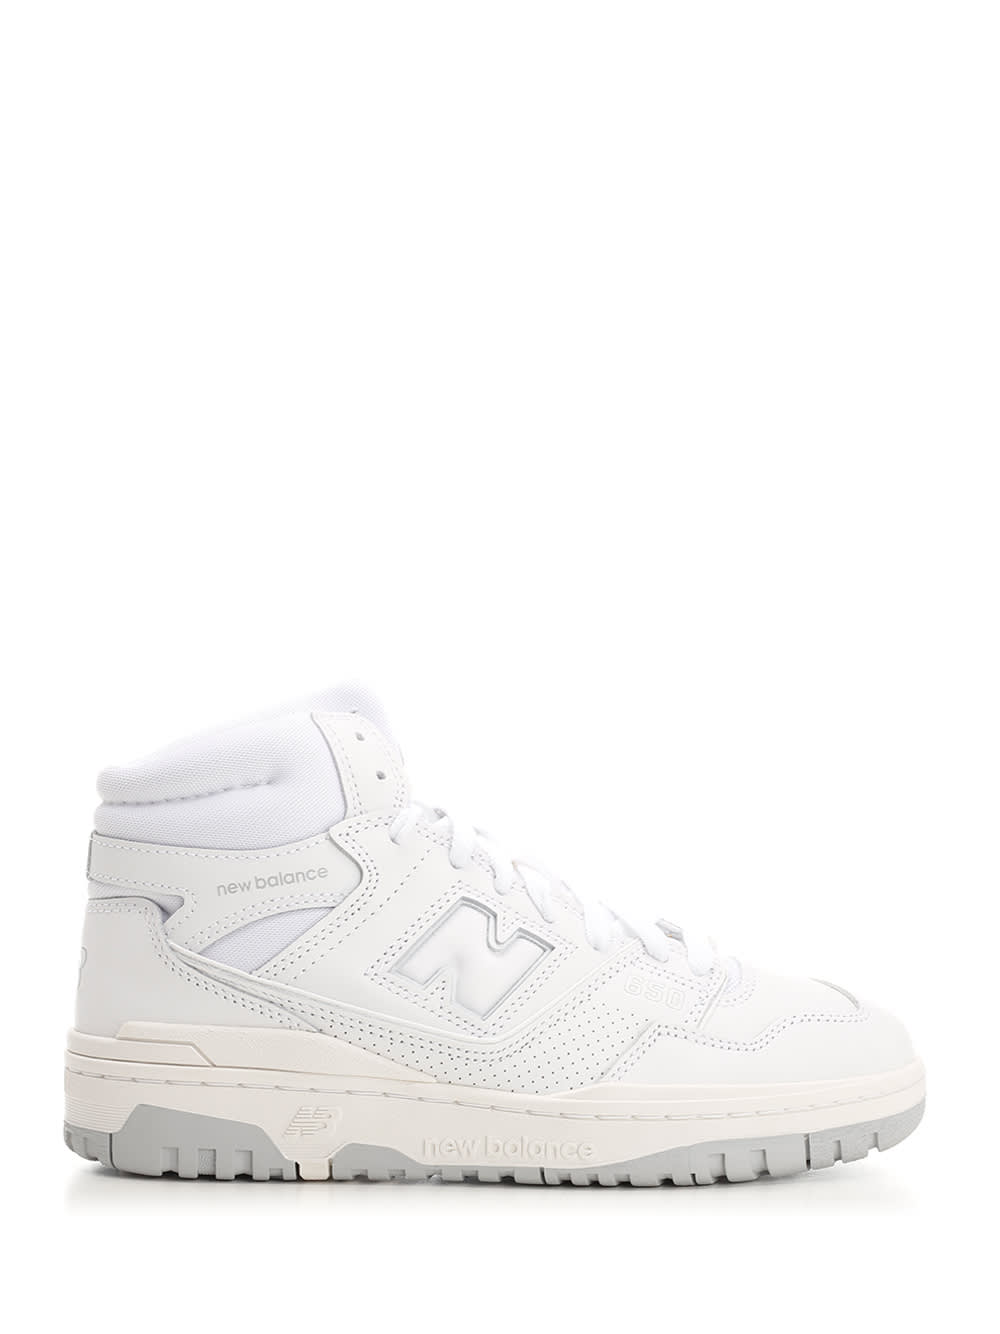 NEW BALANCE WHITE 650 HIGH TOP SNEAKERS